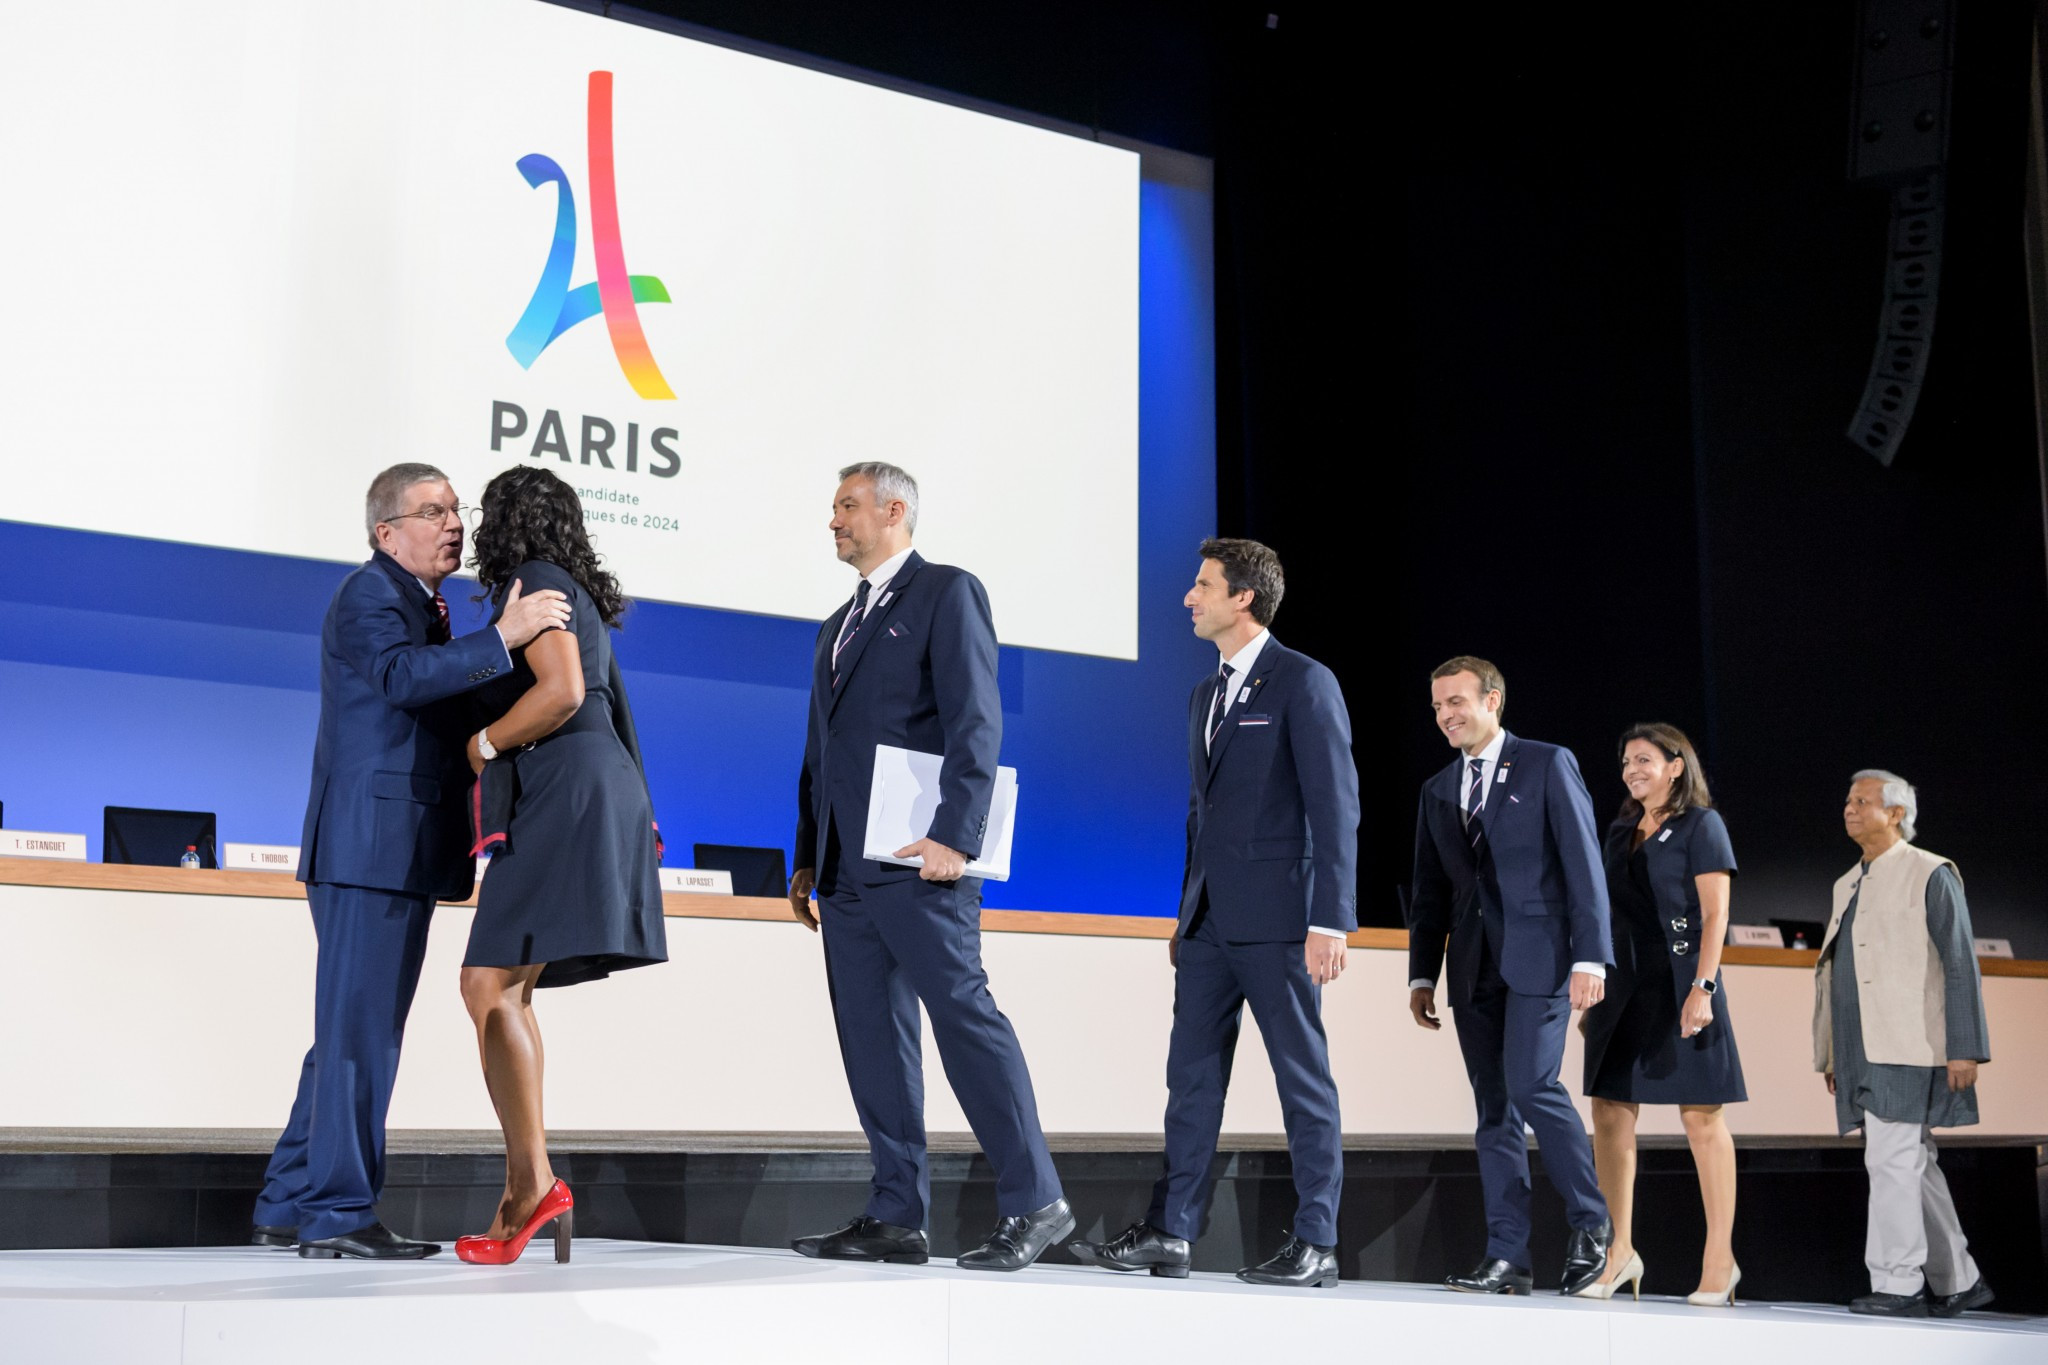 The Los Angeles 2028 deal means Paris are set to host the 2024 Olympic Games ©Getty Images